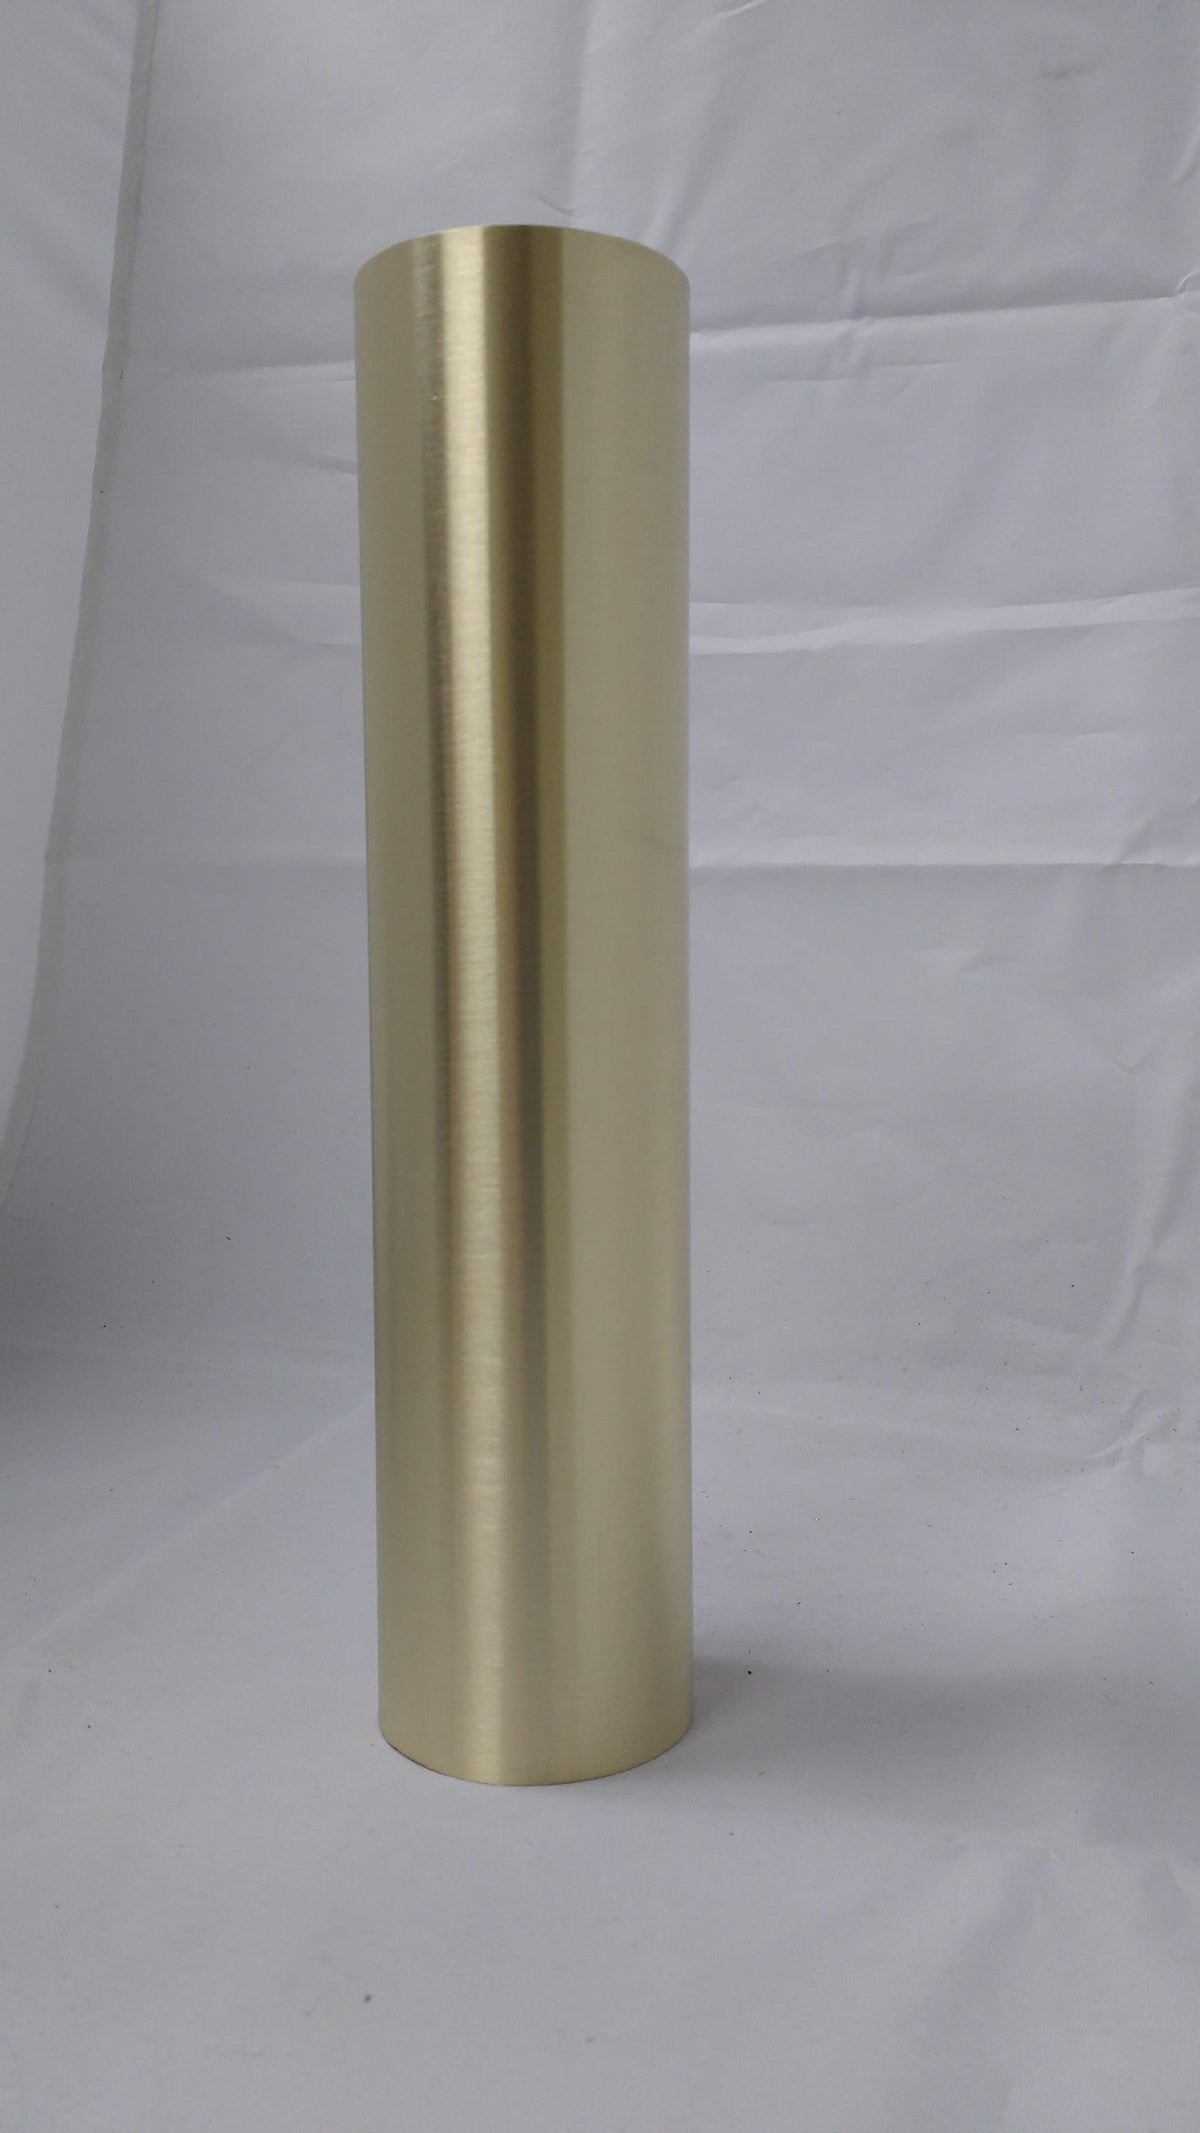 1" Diameter X .050 Wall Tubing - Order By The Foot